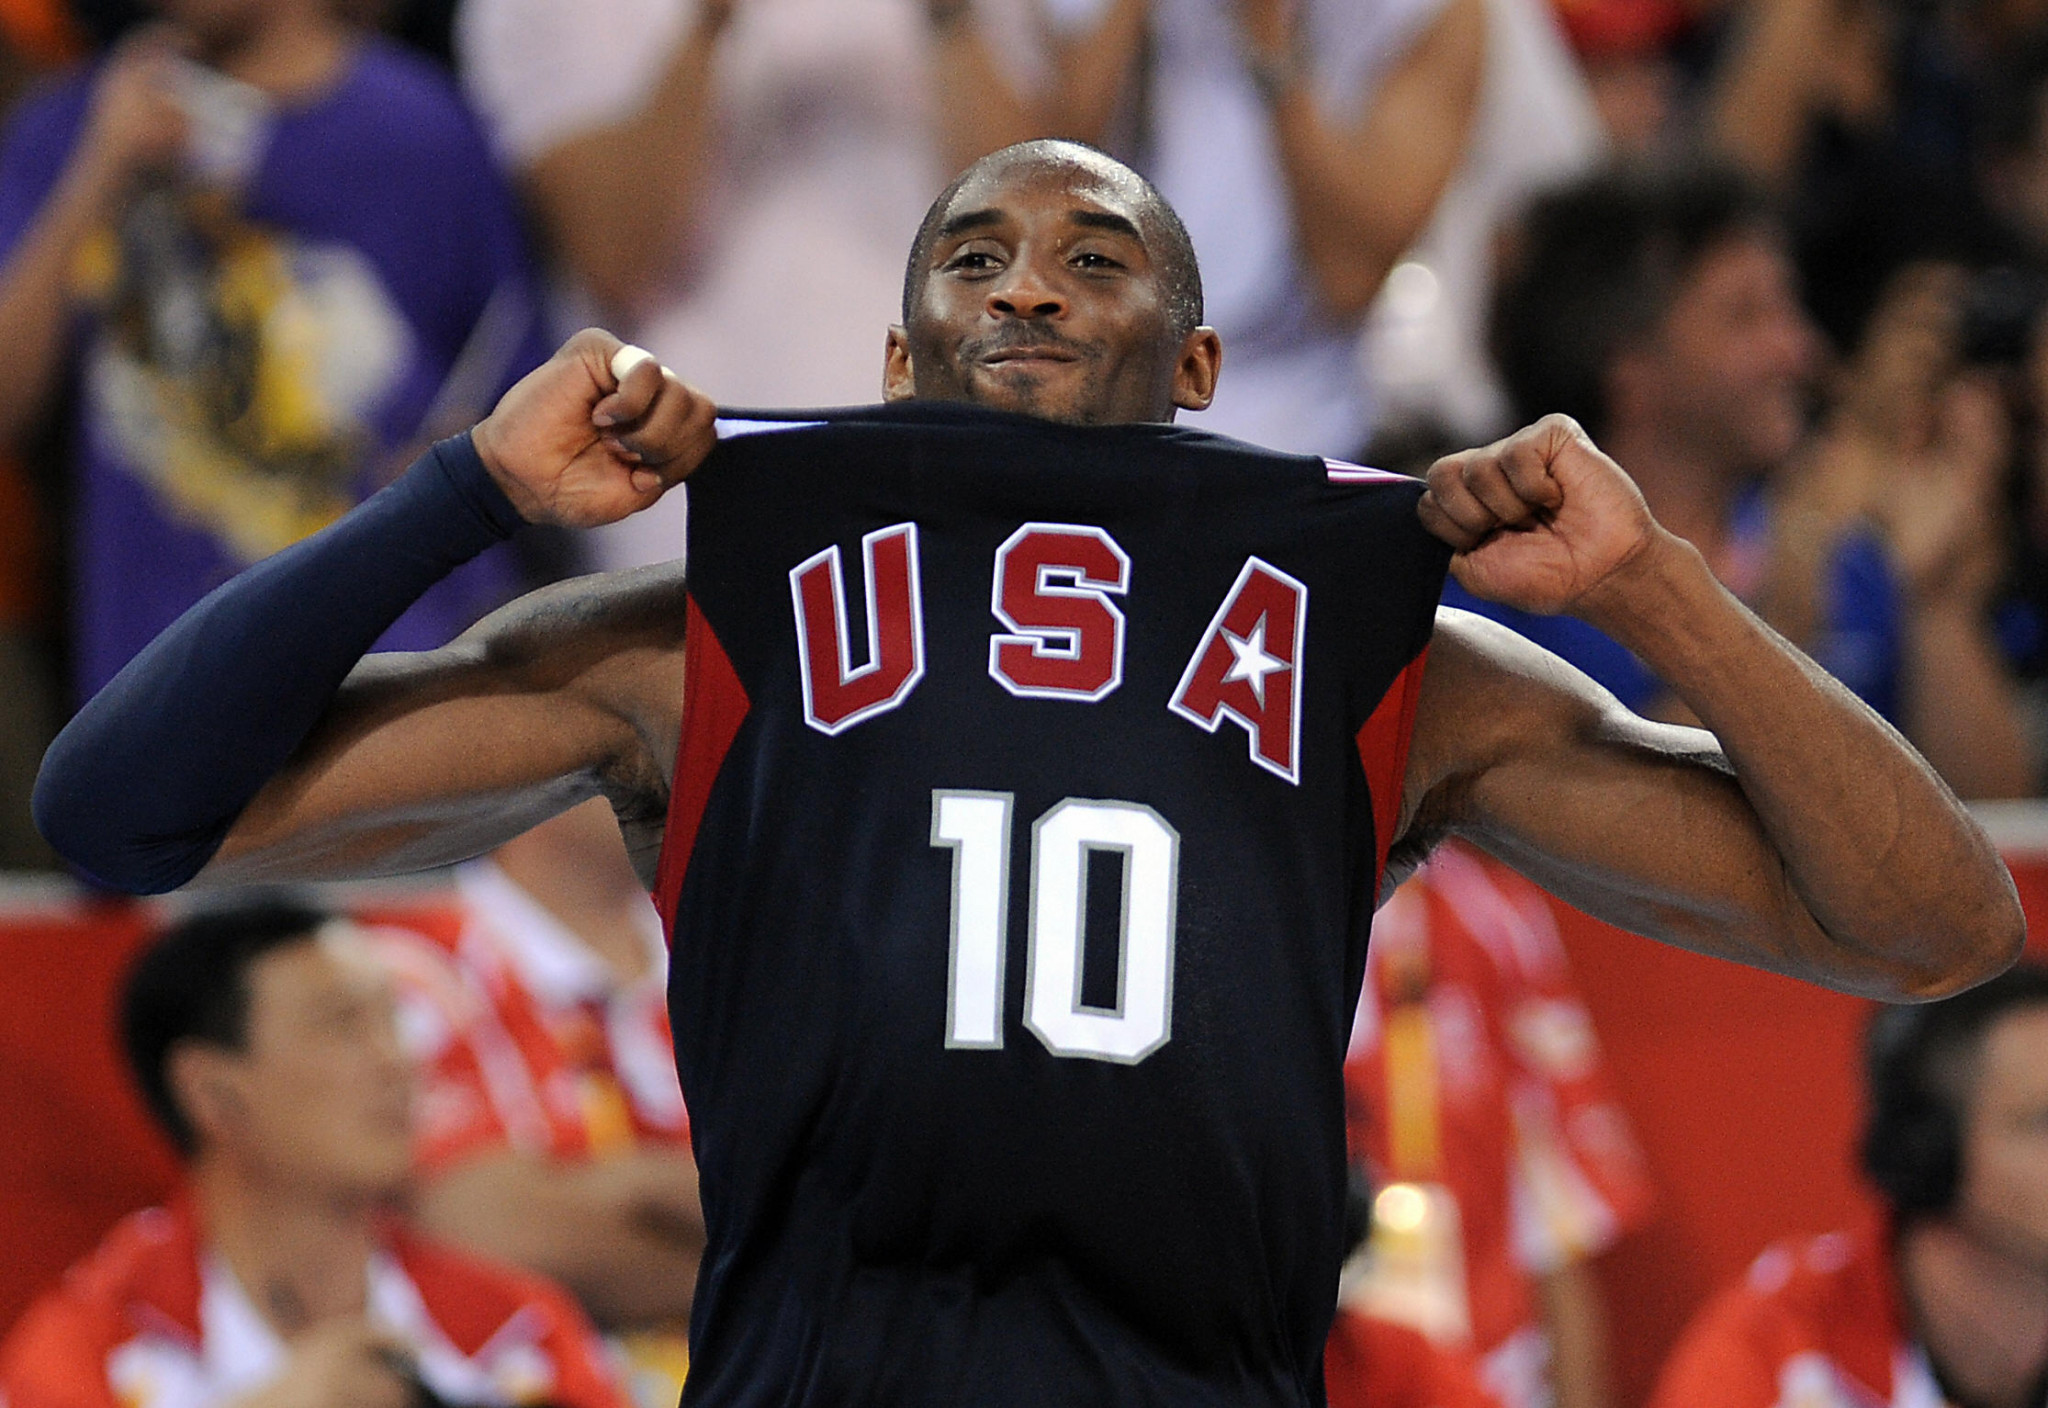 Kobe Bryant won Olympic gold medals with the United States men's basketball team at Beijing 2008 and London 2012 ©Getty Images